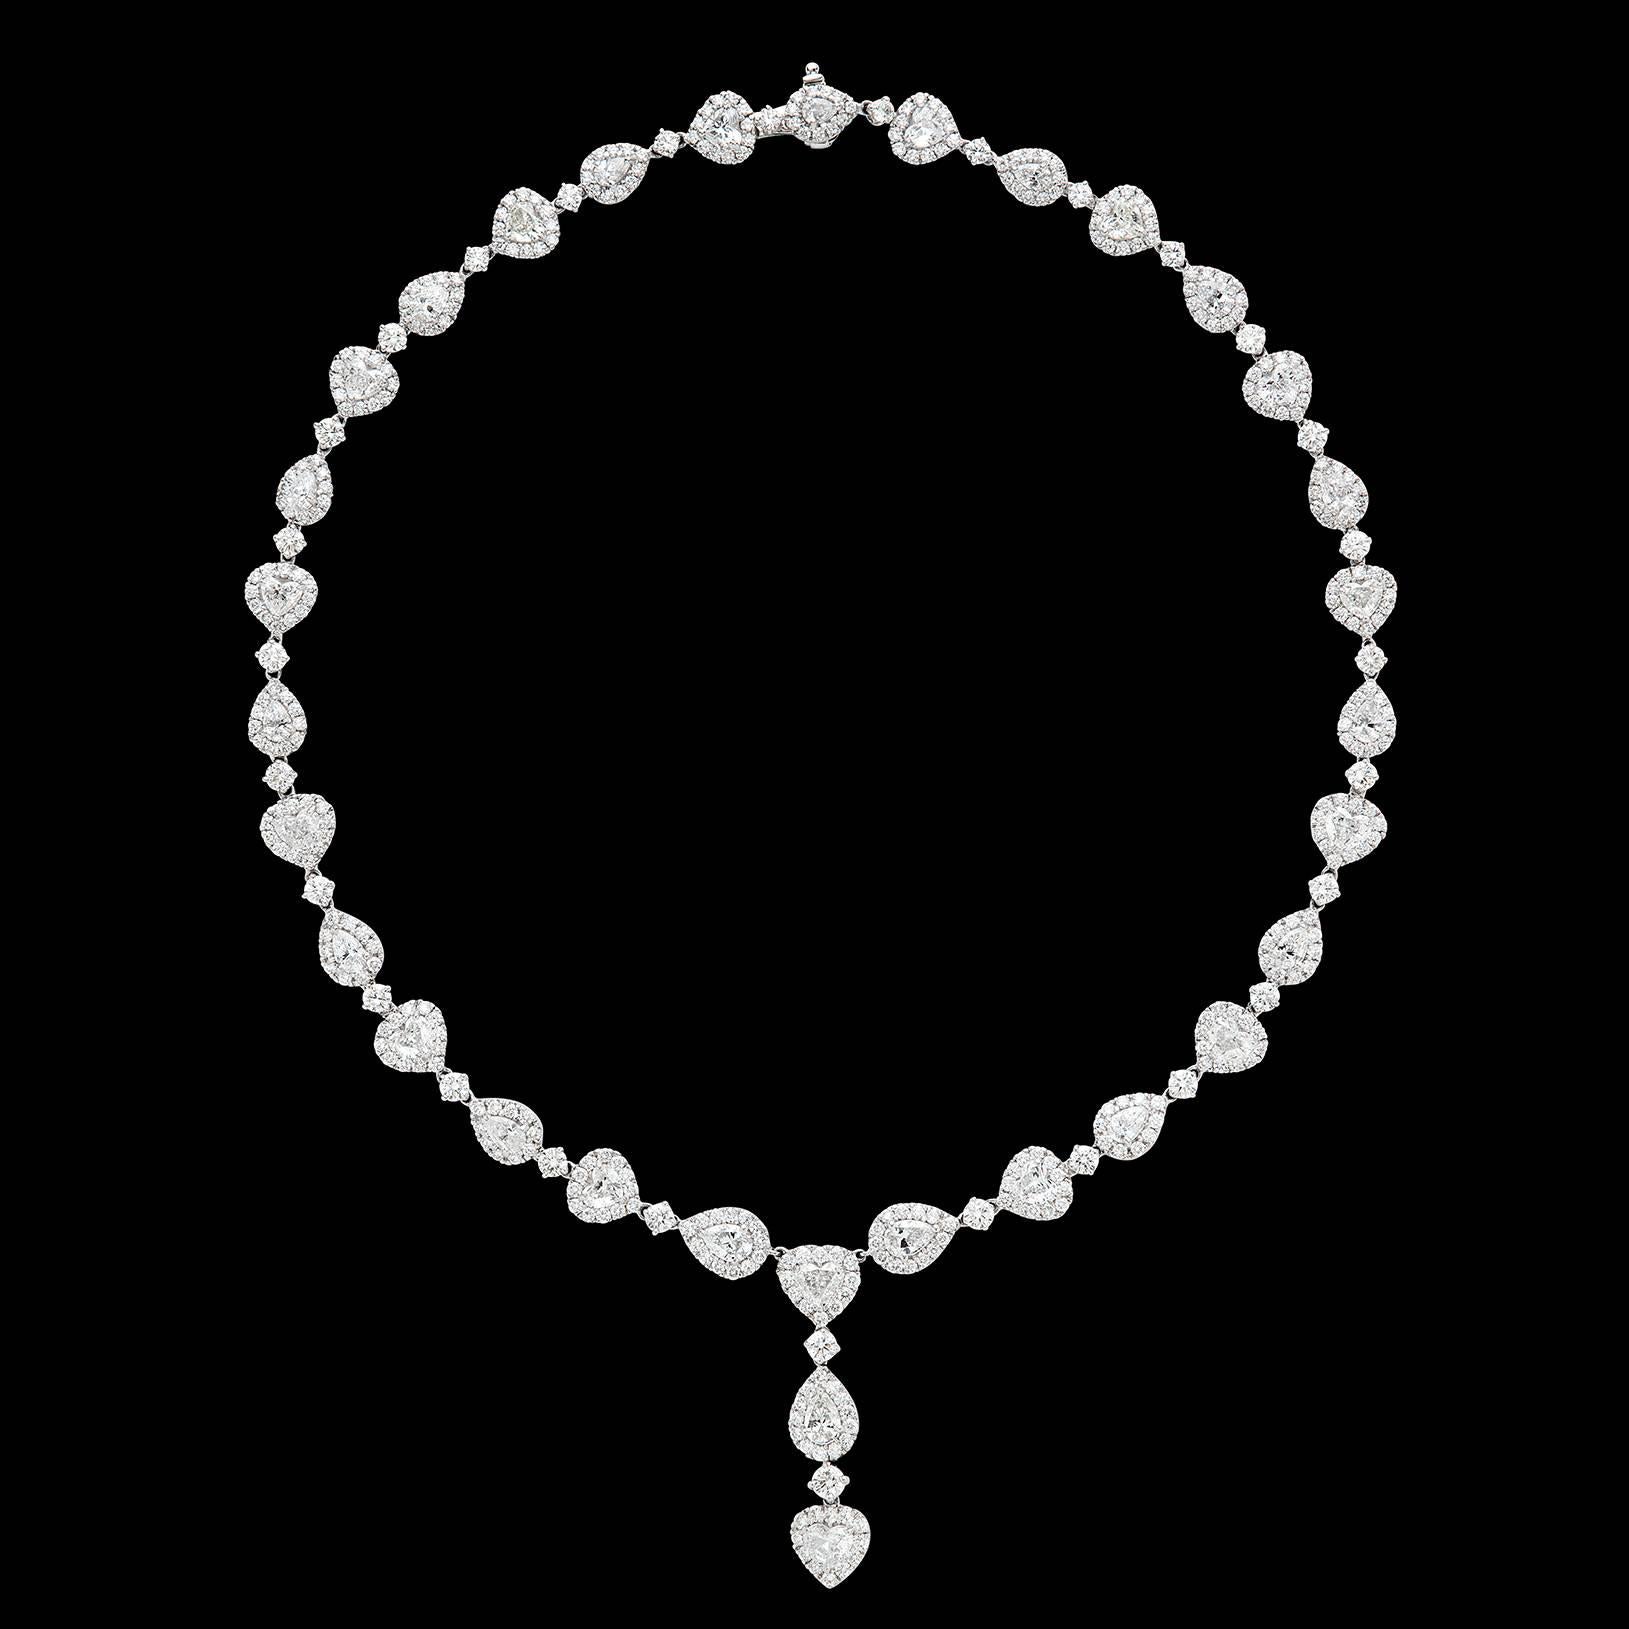 This exquisite estate necklace features an impressive combination of Heart, Pear Shape and Round Brilliant Cut Diamonds for a total diamond weight of approximately 45 carats. Beautifully set in Platinum, each fancy cut diamond is set perfectly